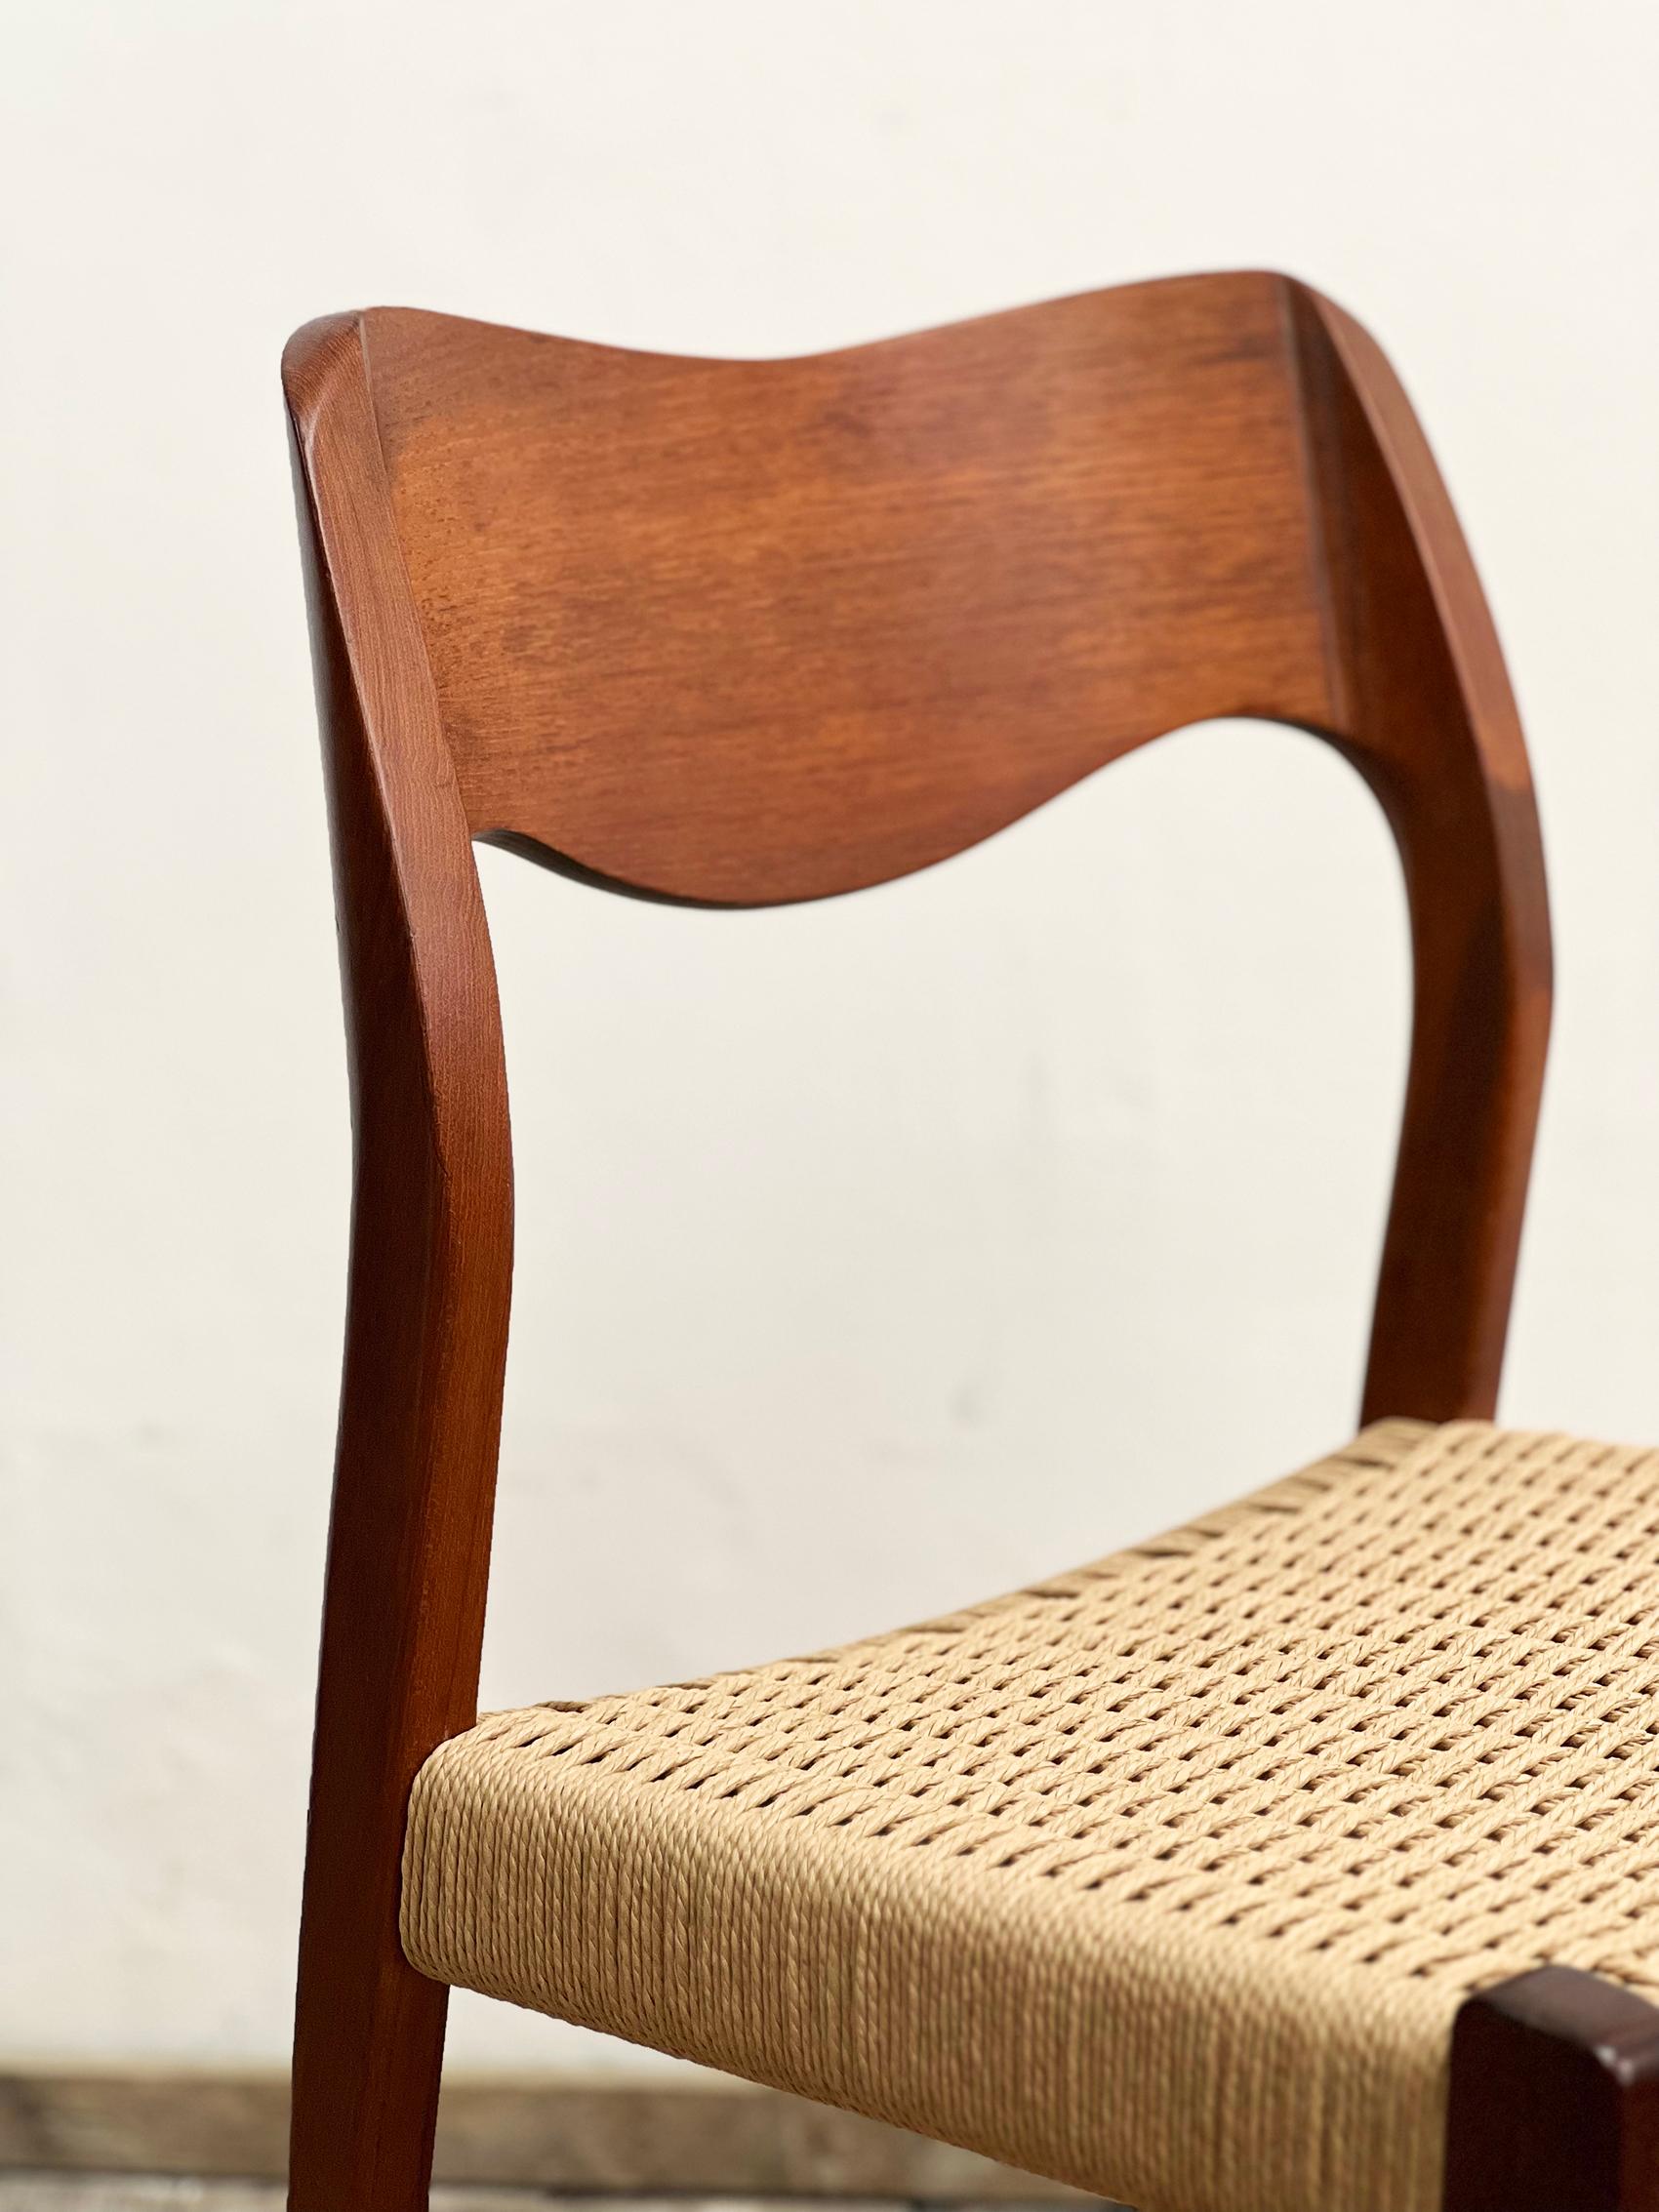 Hand-Carved Mid-Century Teak Dining Chairs #71 by Niels O. Møller for J. L. Moller, Set of 2